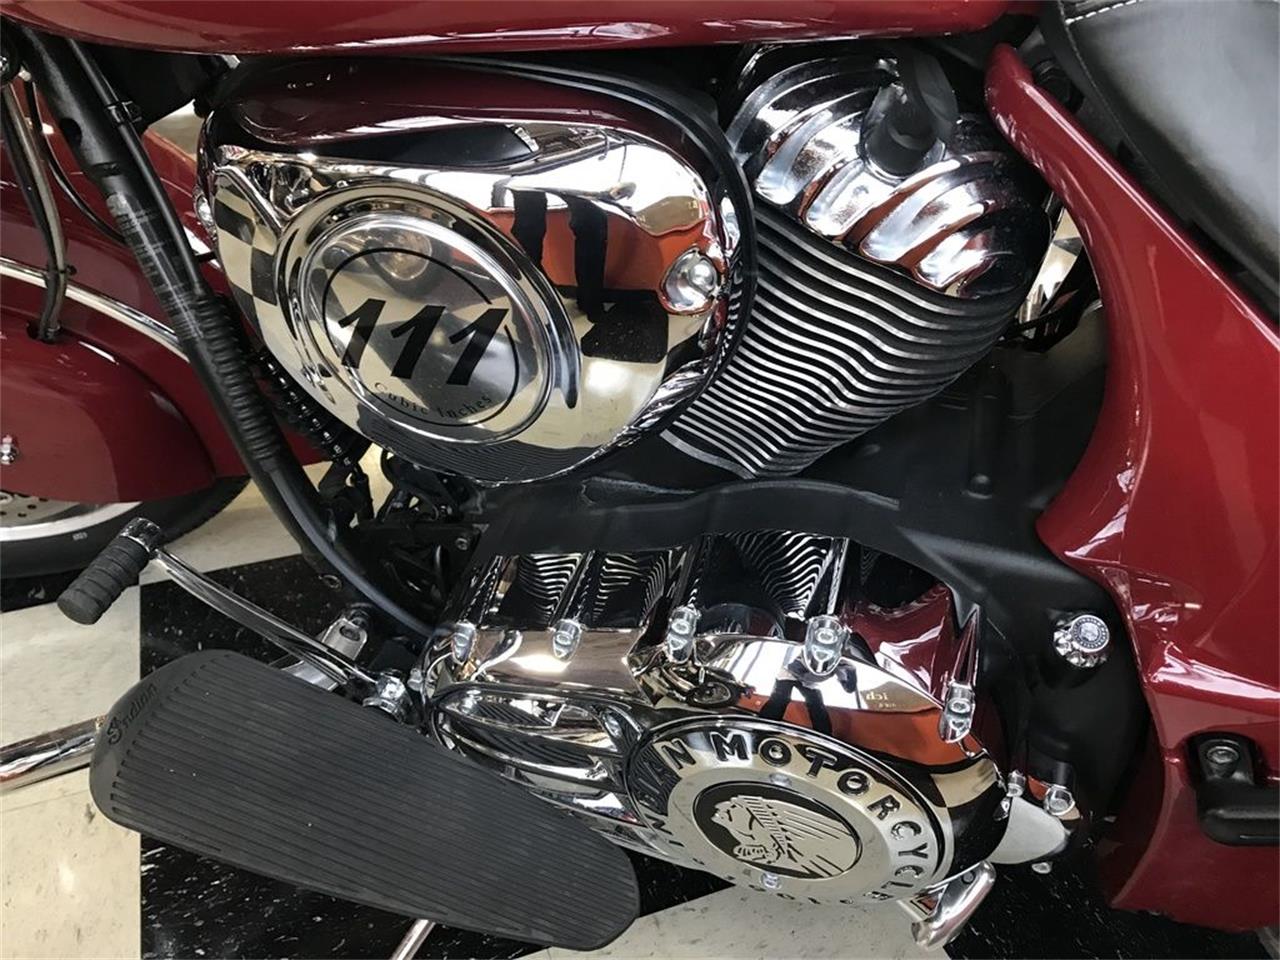 2014 Indian Chieftain for sale in Henderson, NV – photo 13